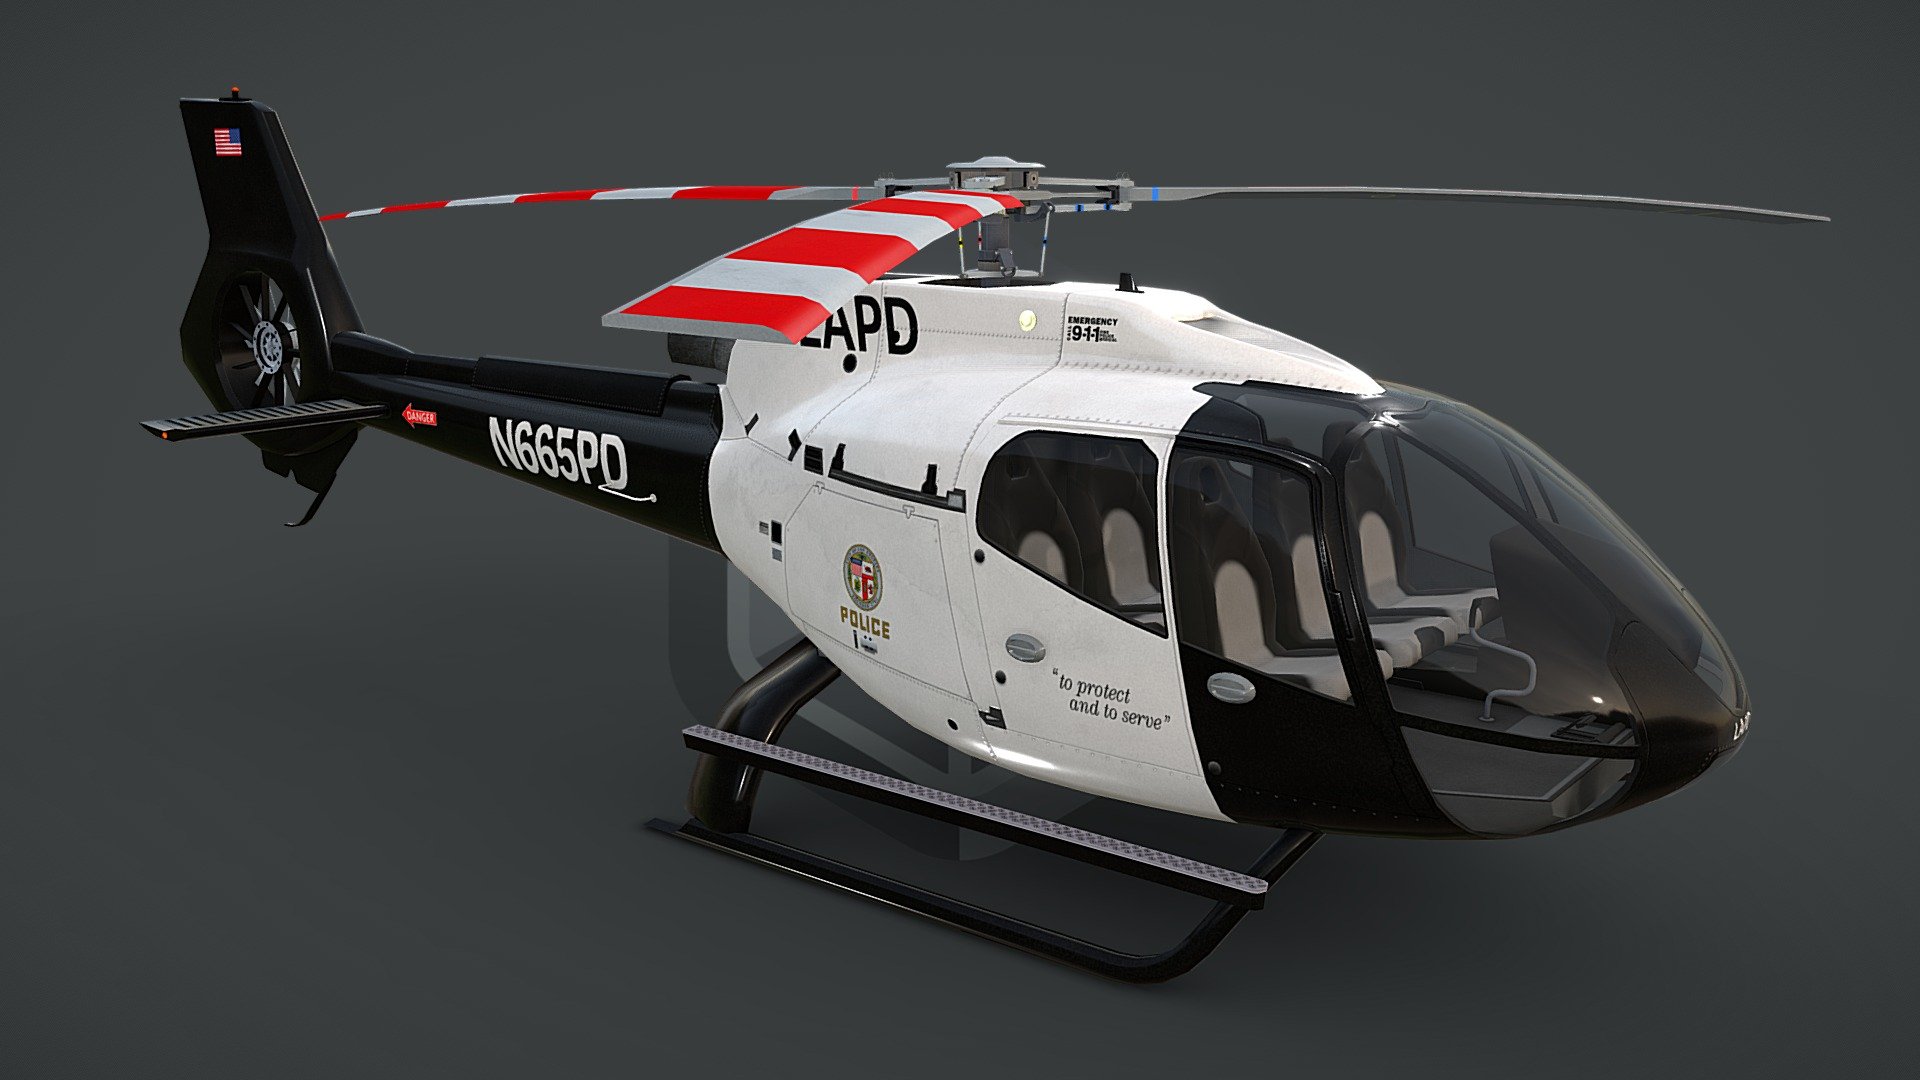 game ready, realtime optimized game asset

unique livery and branding

both PBR workflows ready

LOD0 is HQ lowpoly with bended top rotor, all lights objects and interior

LOD0 19710 tris, LOD1 10462 tris, LOD2 7388 tris, LOD3 5990 tris

100% triangulated and 100% unwrapped non-overlapping

5 x uv layouts, body, HQ rotors, LQ rotors, interior, lights

made using blueprints, real world scale meters

all rotors detached and animable in each LOD with properly placed pivots for flawless animations

hideable capsule built interior that fits perfectly the body

interior is simple but a great basis for further elaboration

big textures pack with native 4096 x 4096 px textures for body, rotors, interior

LOD3 rotors have own textures with blades on alpha channel

light objects have own, small, textures, and contain an emission map

pack contains native .max scene, created in 3dsmax 2014

pack contains clean and flawless FBX and OBJ files

each LOD and all LOD together exported in each file format
 - LAPD Helicopter EC130-H130 Livery 18 - Buy Royalty Free 3D model by CGAmp 3d model